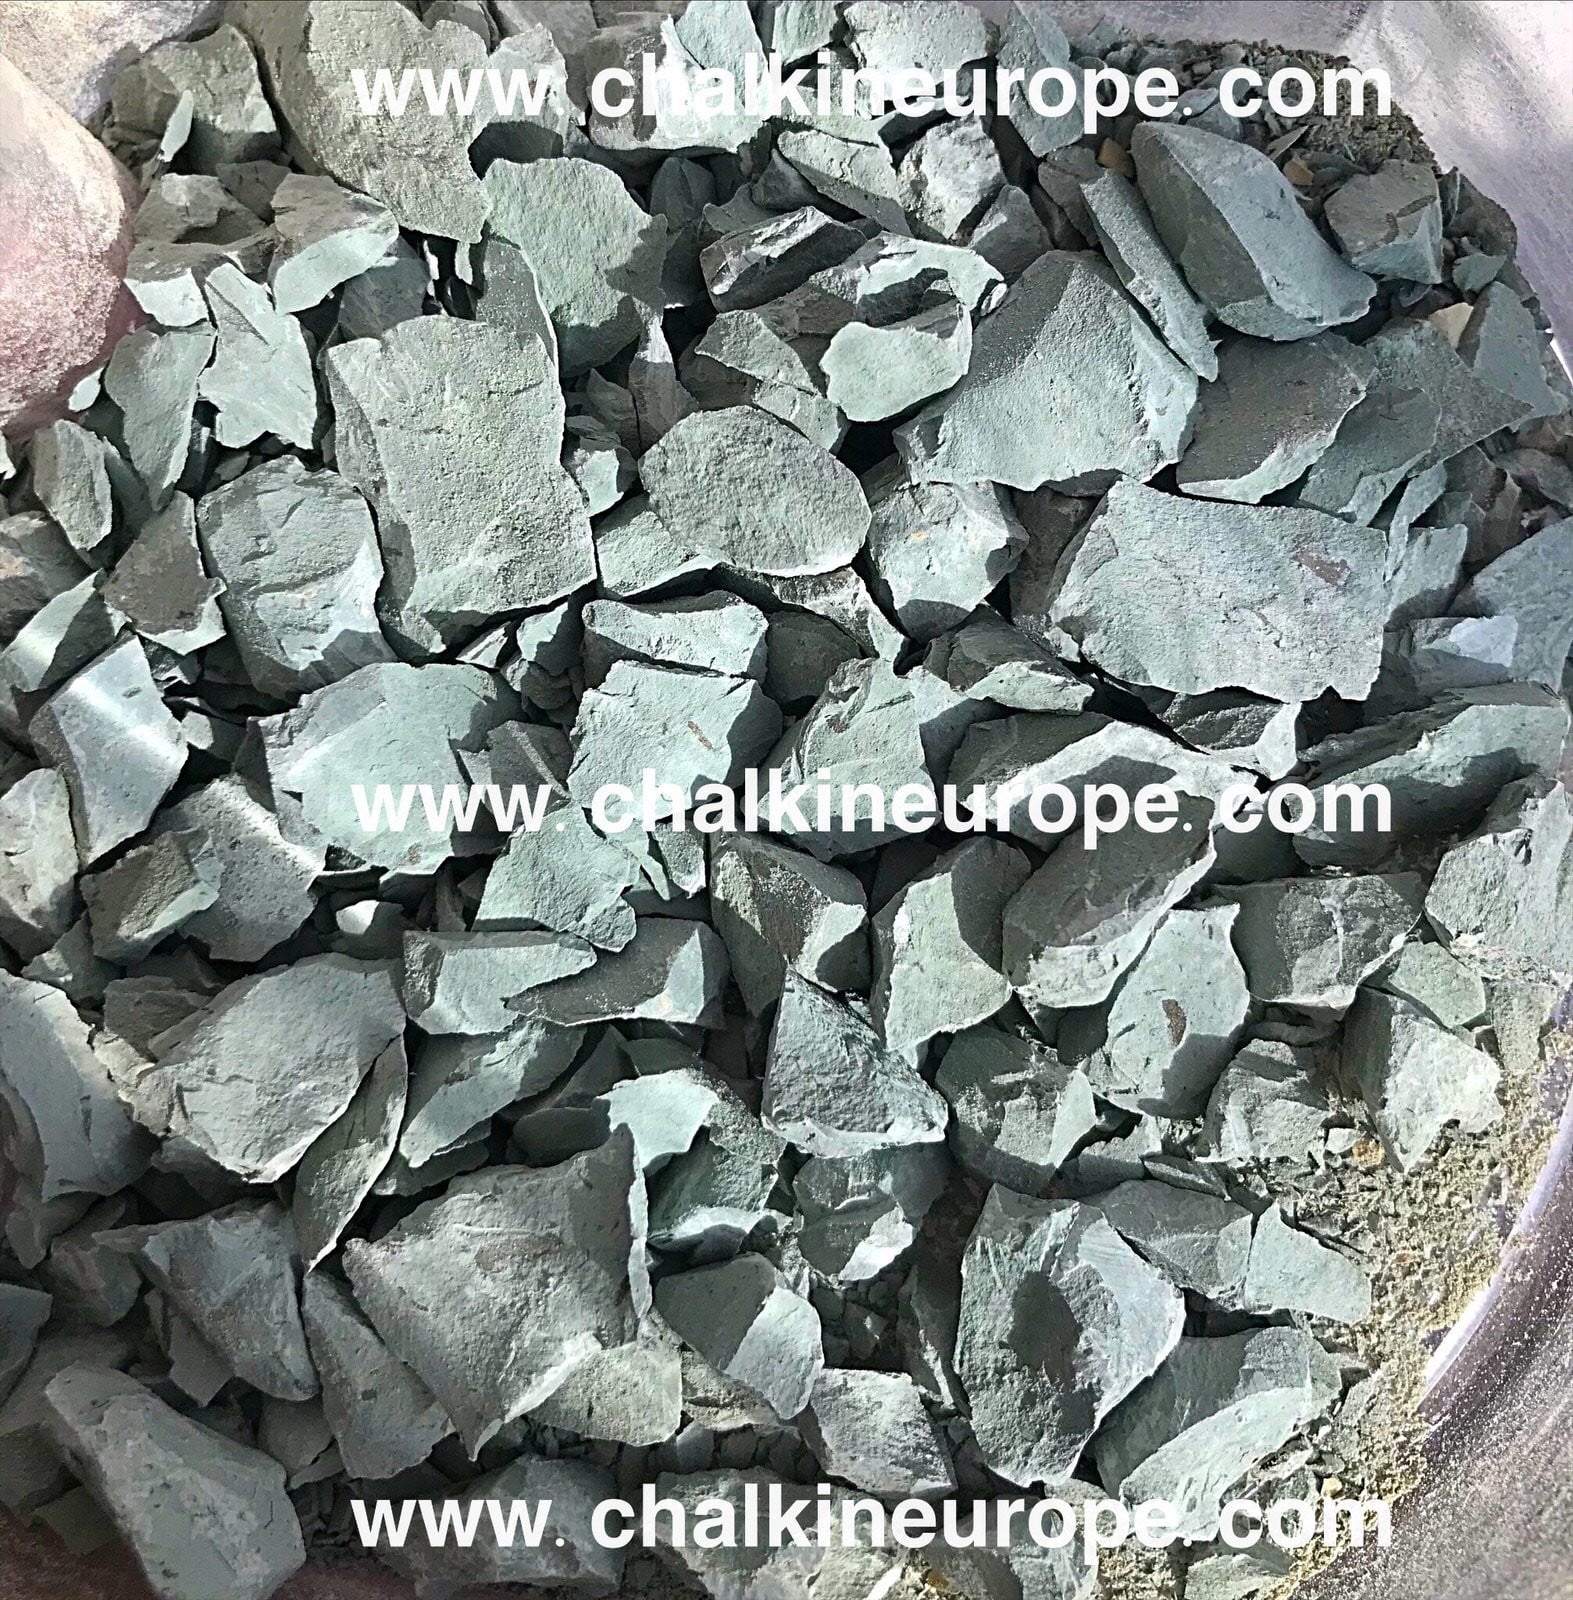 Cambrian Clay Bites - Chalkineurope